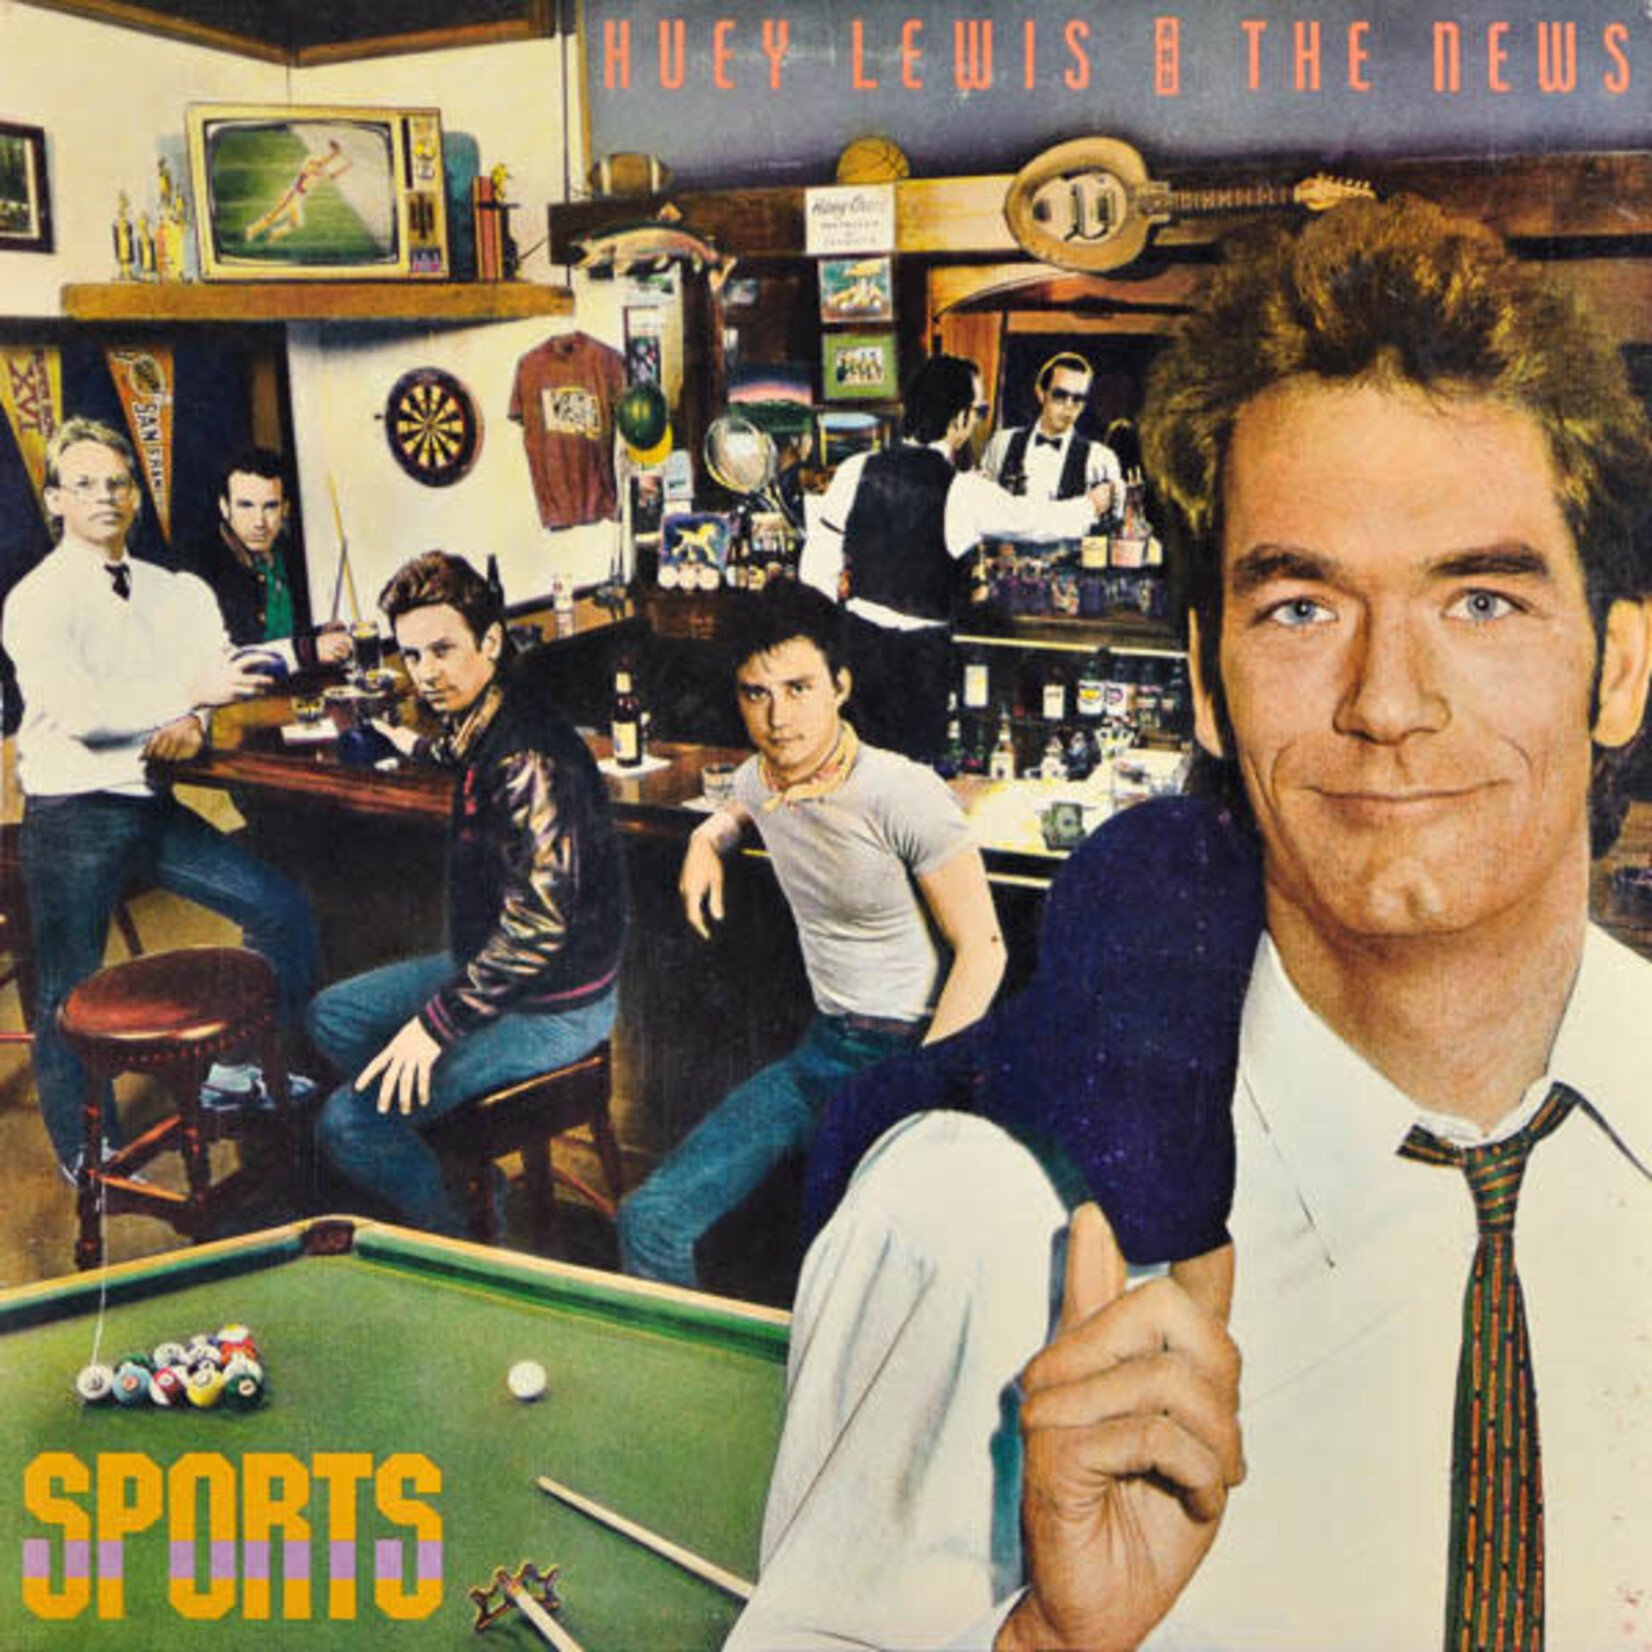 [New] Huey & The News Lewis - Sports (40th Anniversary)